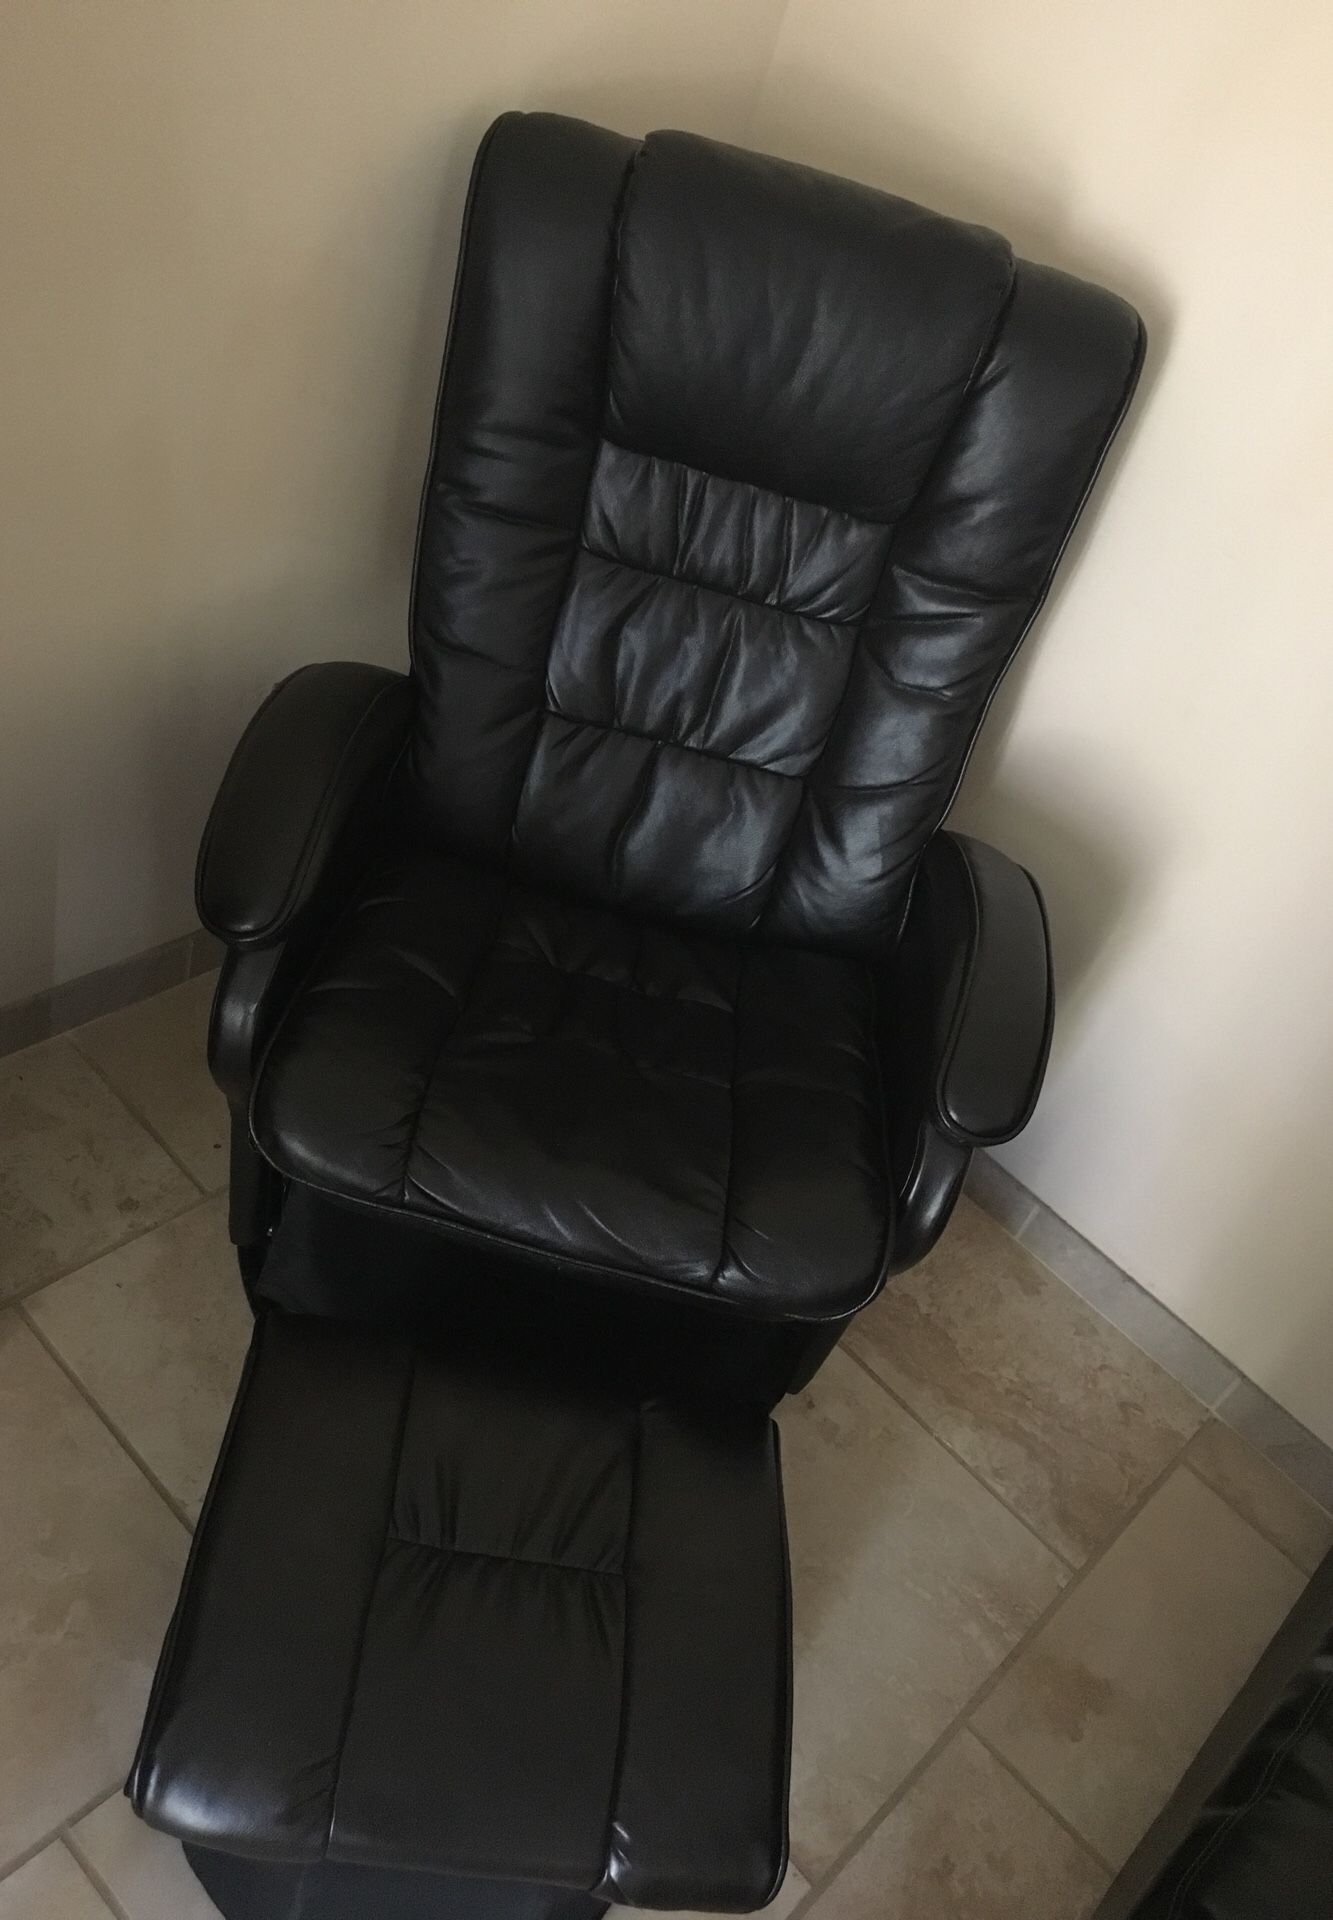 Recliner Chair With Foot Rest